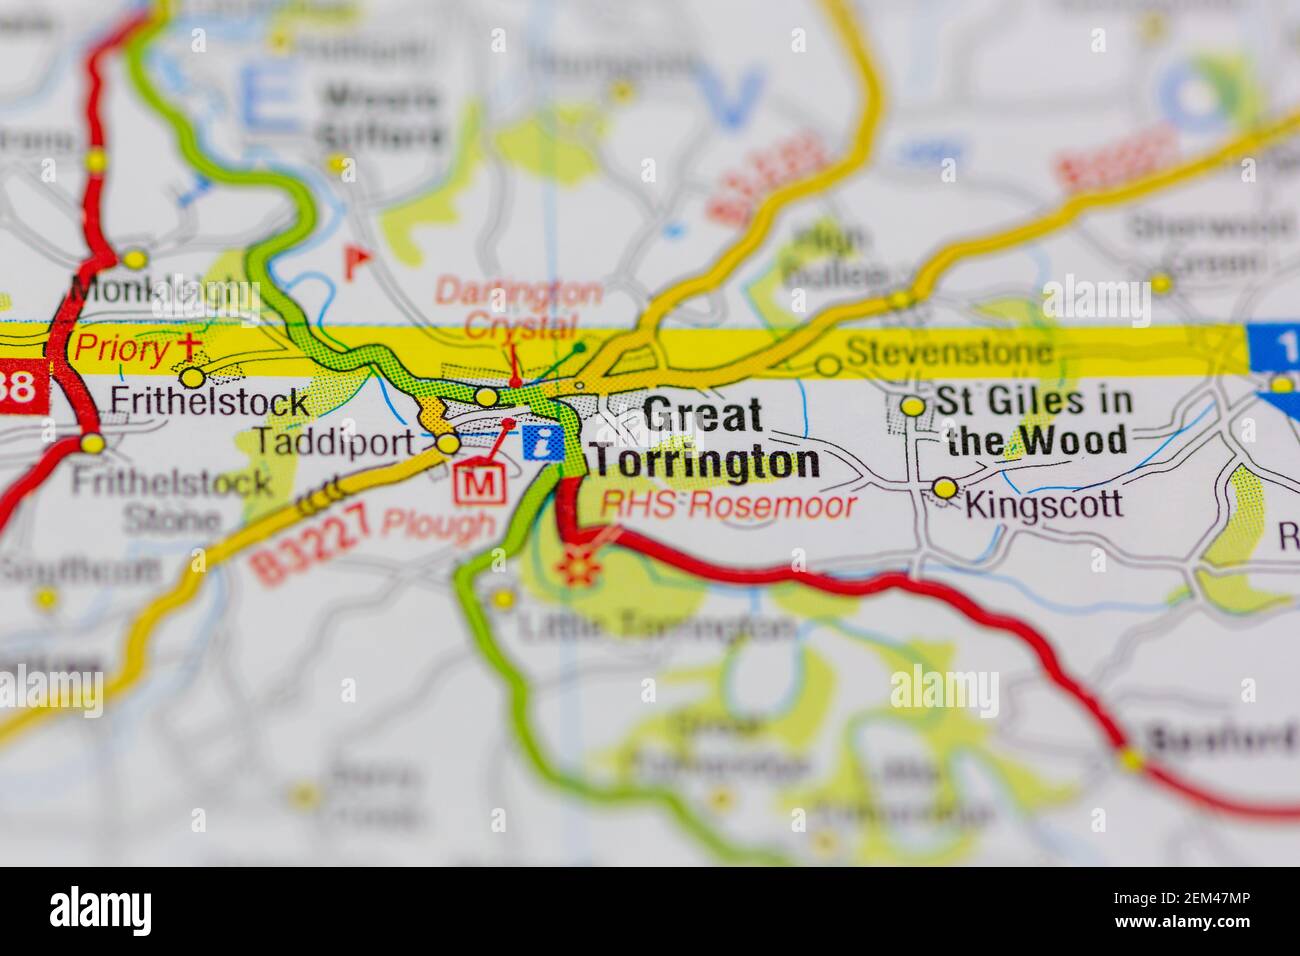 Great Torrington shown on a road map or geography map Stock Photo